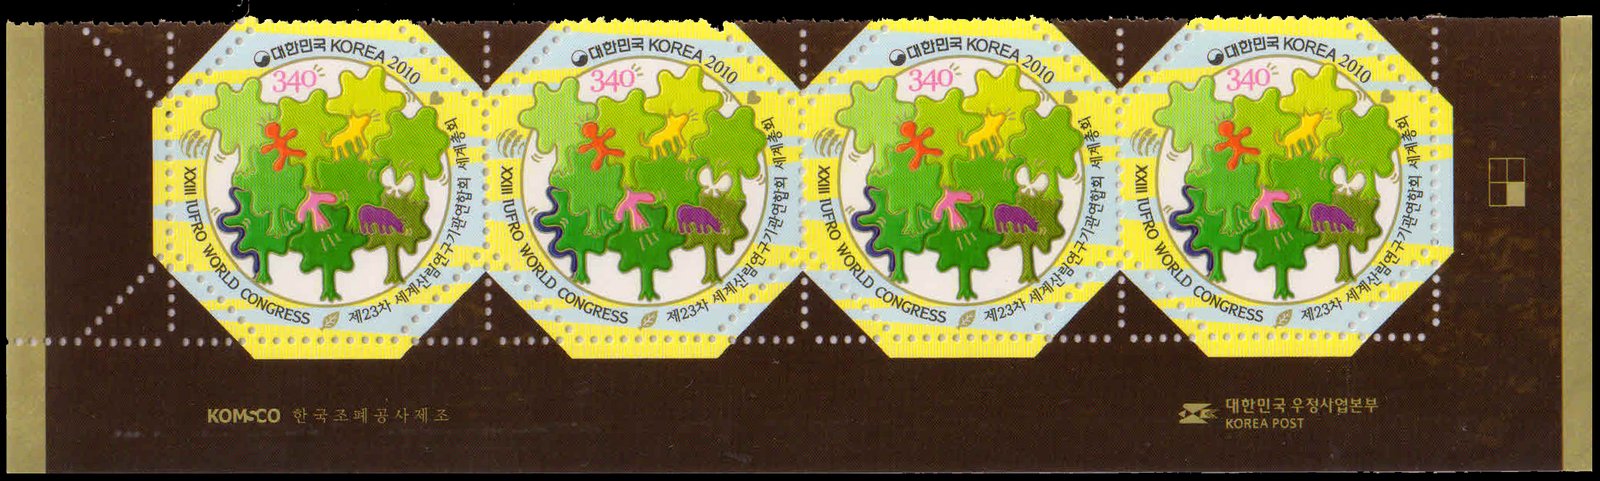 SOUTH KOREA 2010-IUFRO-Global Network for Forest Science, Sheetlet of 4 Stamps-Odd Shaped, S.G. 3123